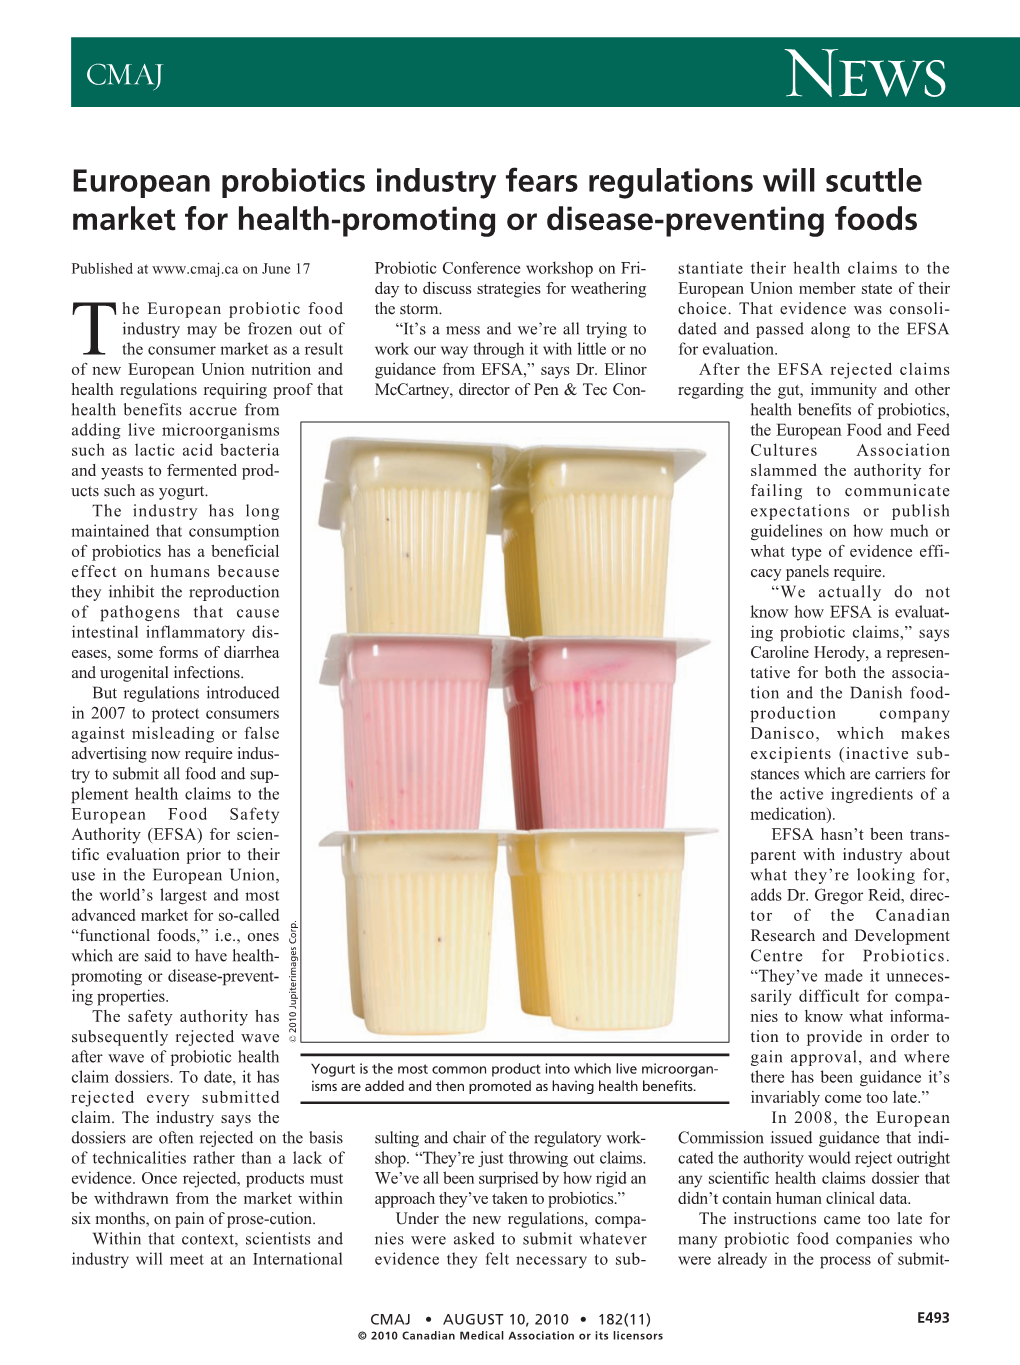 CMAJ European Probiotics Industry Fears Regulations Will Scuttle Market for Health-Promoting Or Disease-Preventing Foods